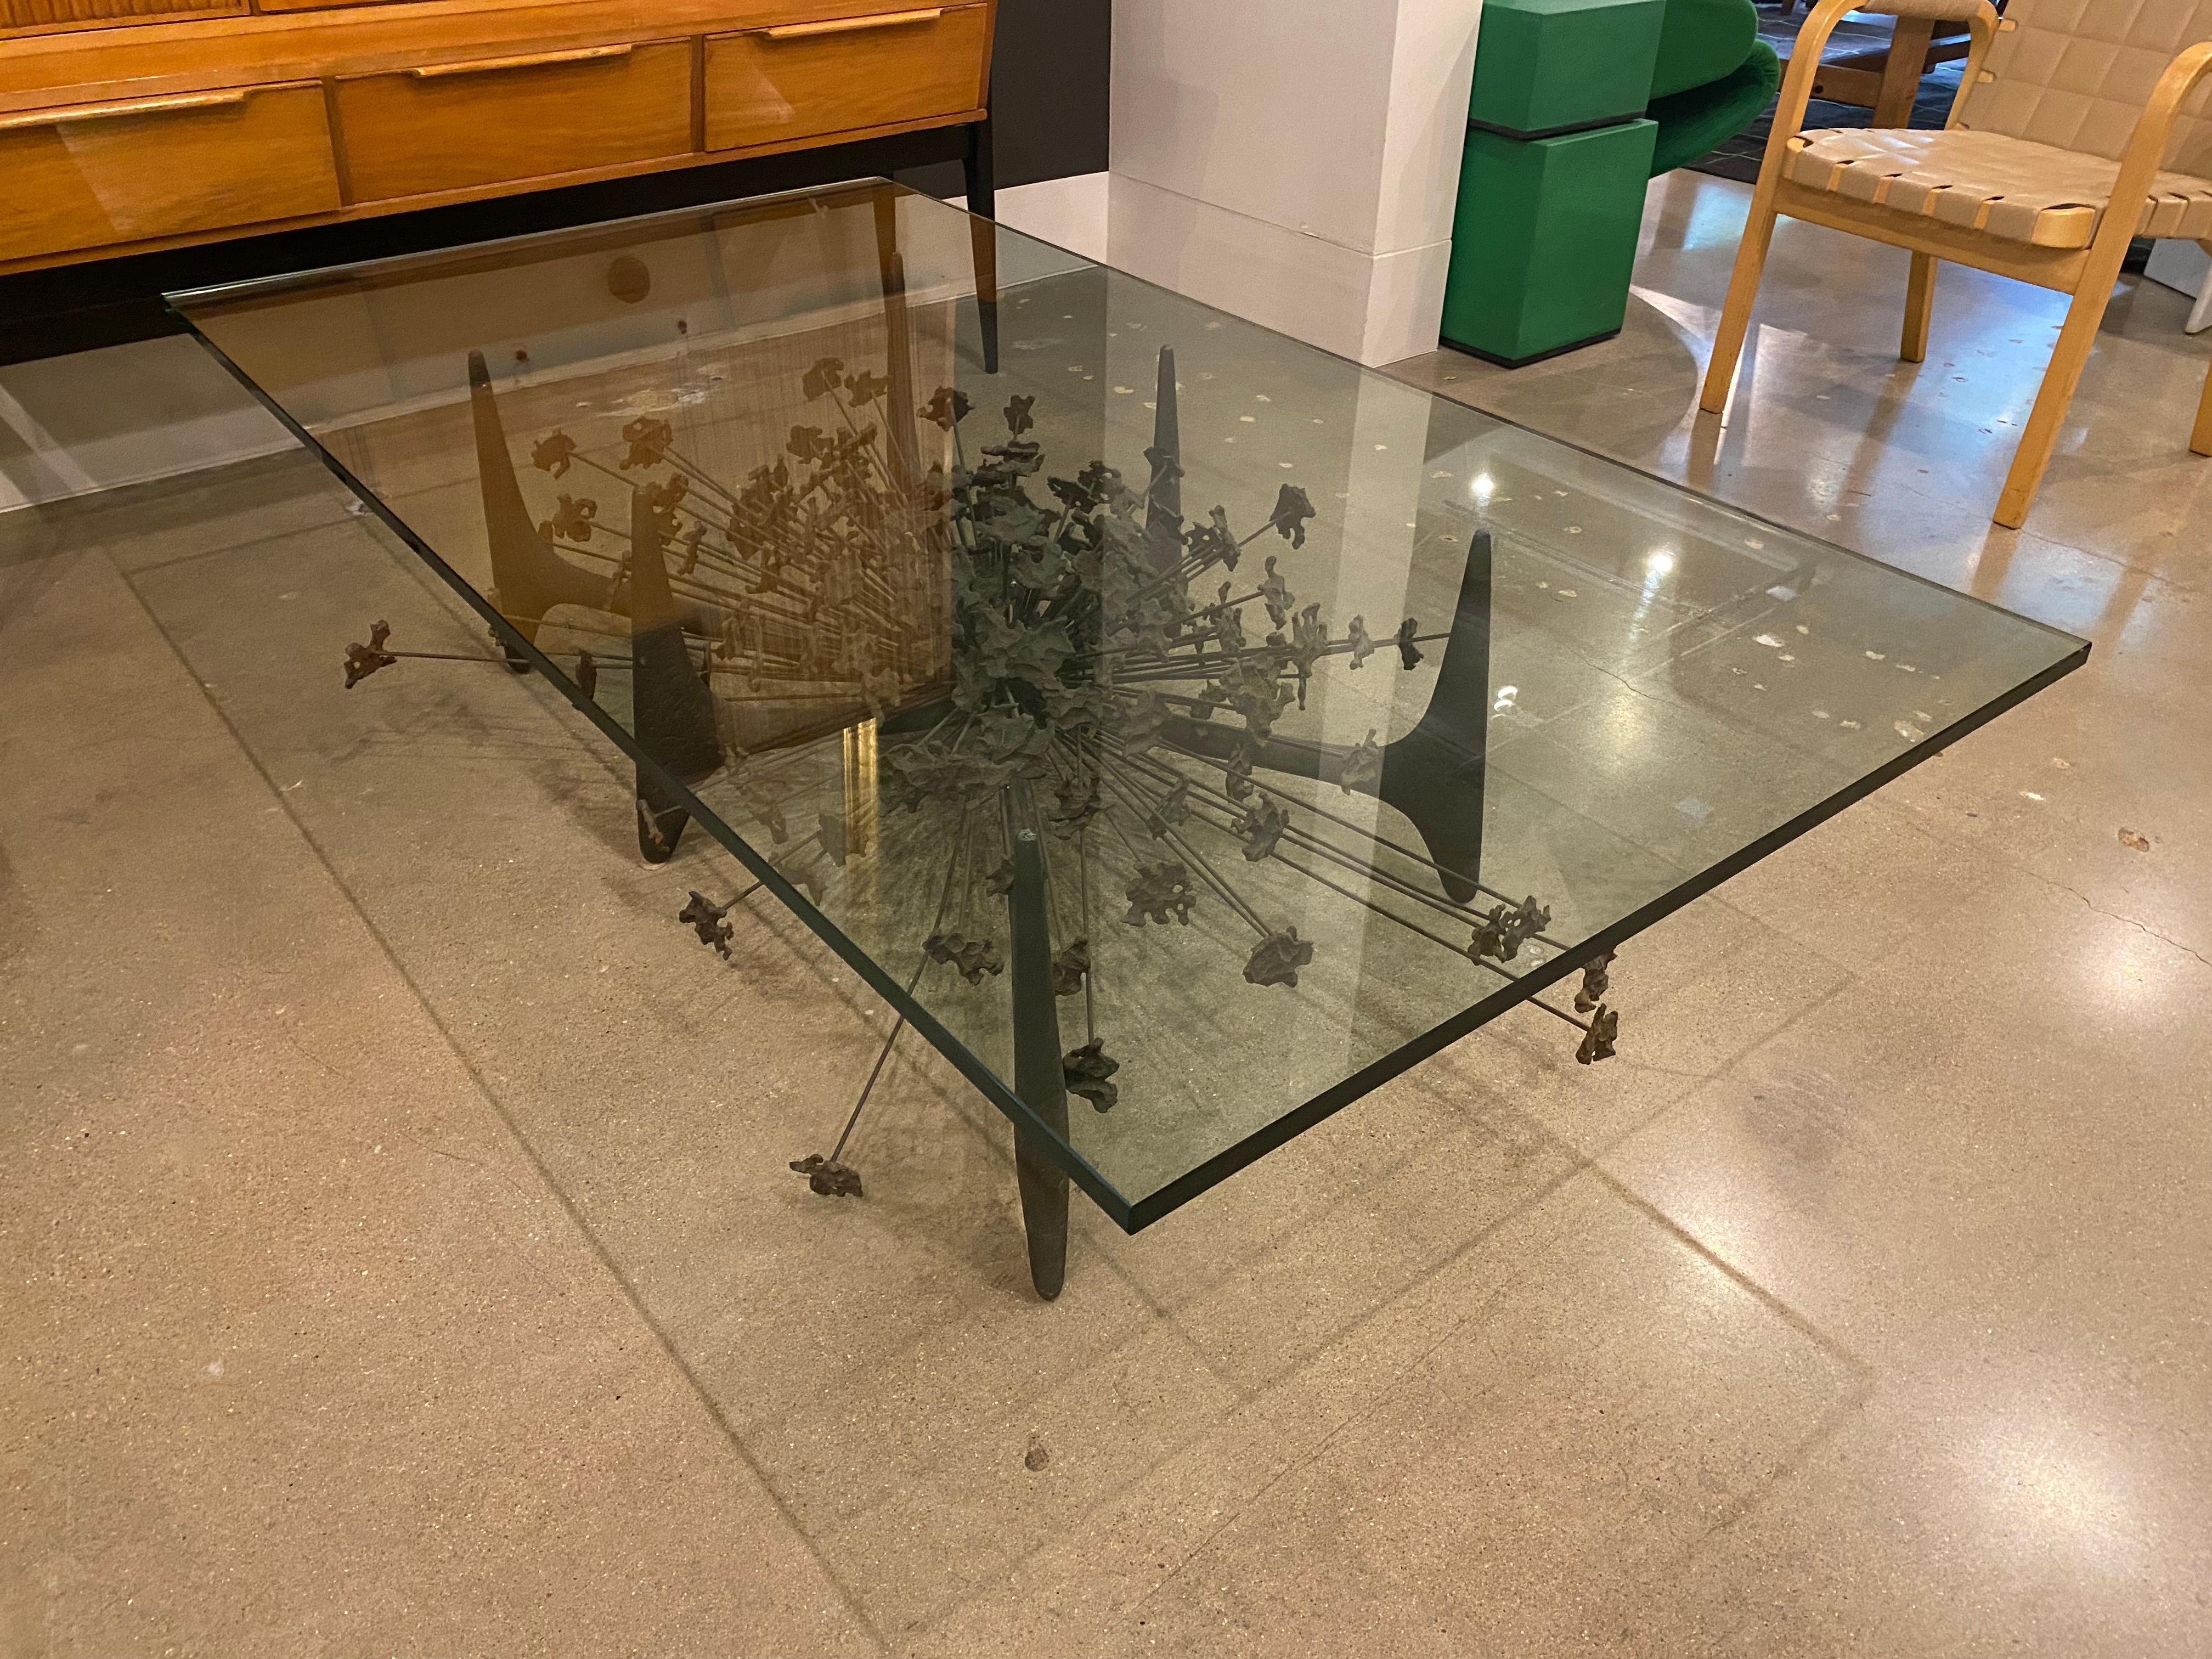 Abstract cocktail table in steel and bronze, designed by California artist, Daniel Gluck, and crafted by Daniel Gluck Studio. Classic example of Brutalist design from the 1970's. Size reflects existing glass top, but glass can be replaced with a